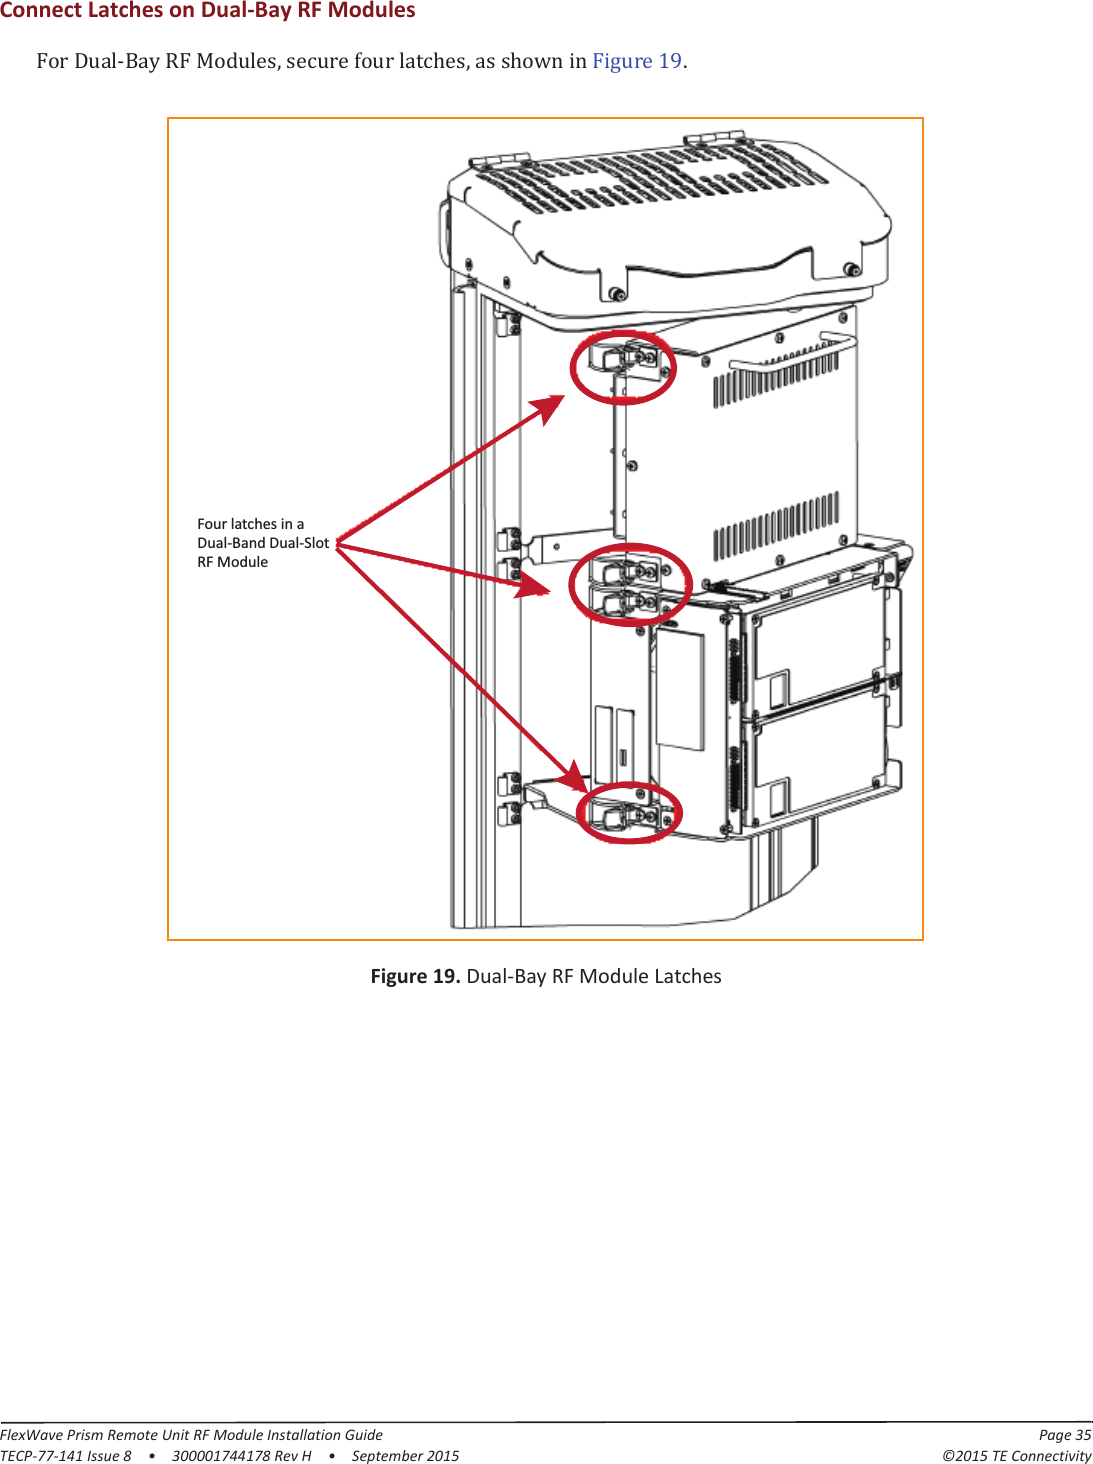 FlexWave Prism Remote Unit RF Module Installation Guide Page 35TECP-77-141 Issue 8  •  300001744178 Rev H  •  September 2015 ©2015 TE ConnectivityConnect Latches on Dual-Bay RF ModulesǦǡǡͳͻǤFigure 19. Dual-Bay RF Module LatchesFour latches in aDual-Band Dual-SlotRF Module